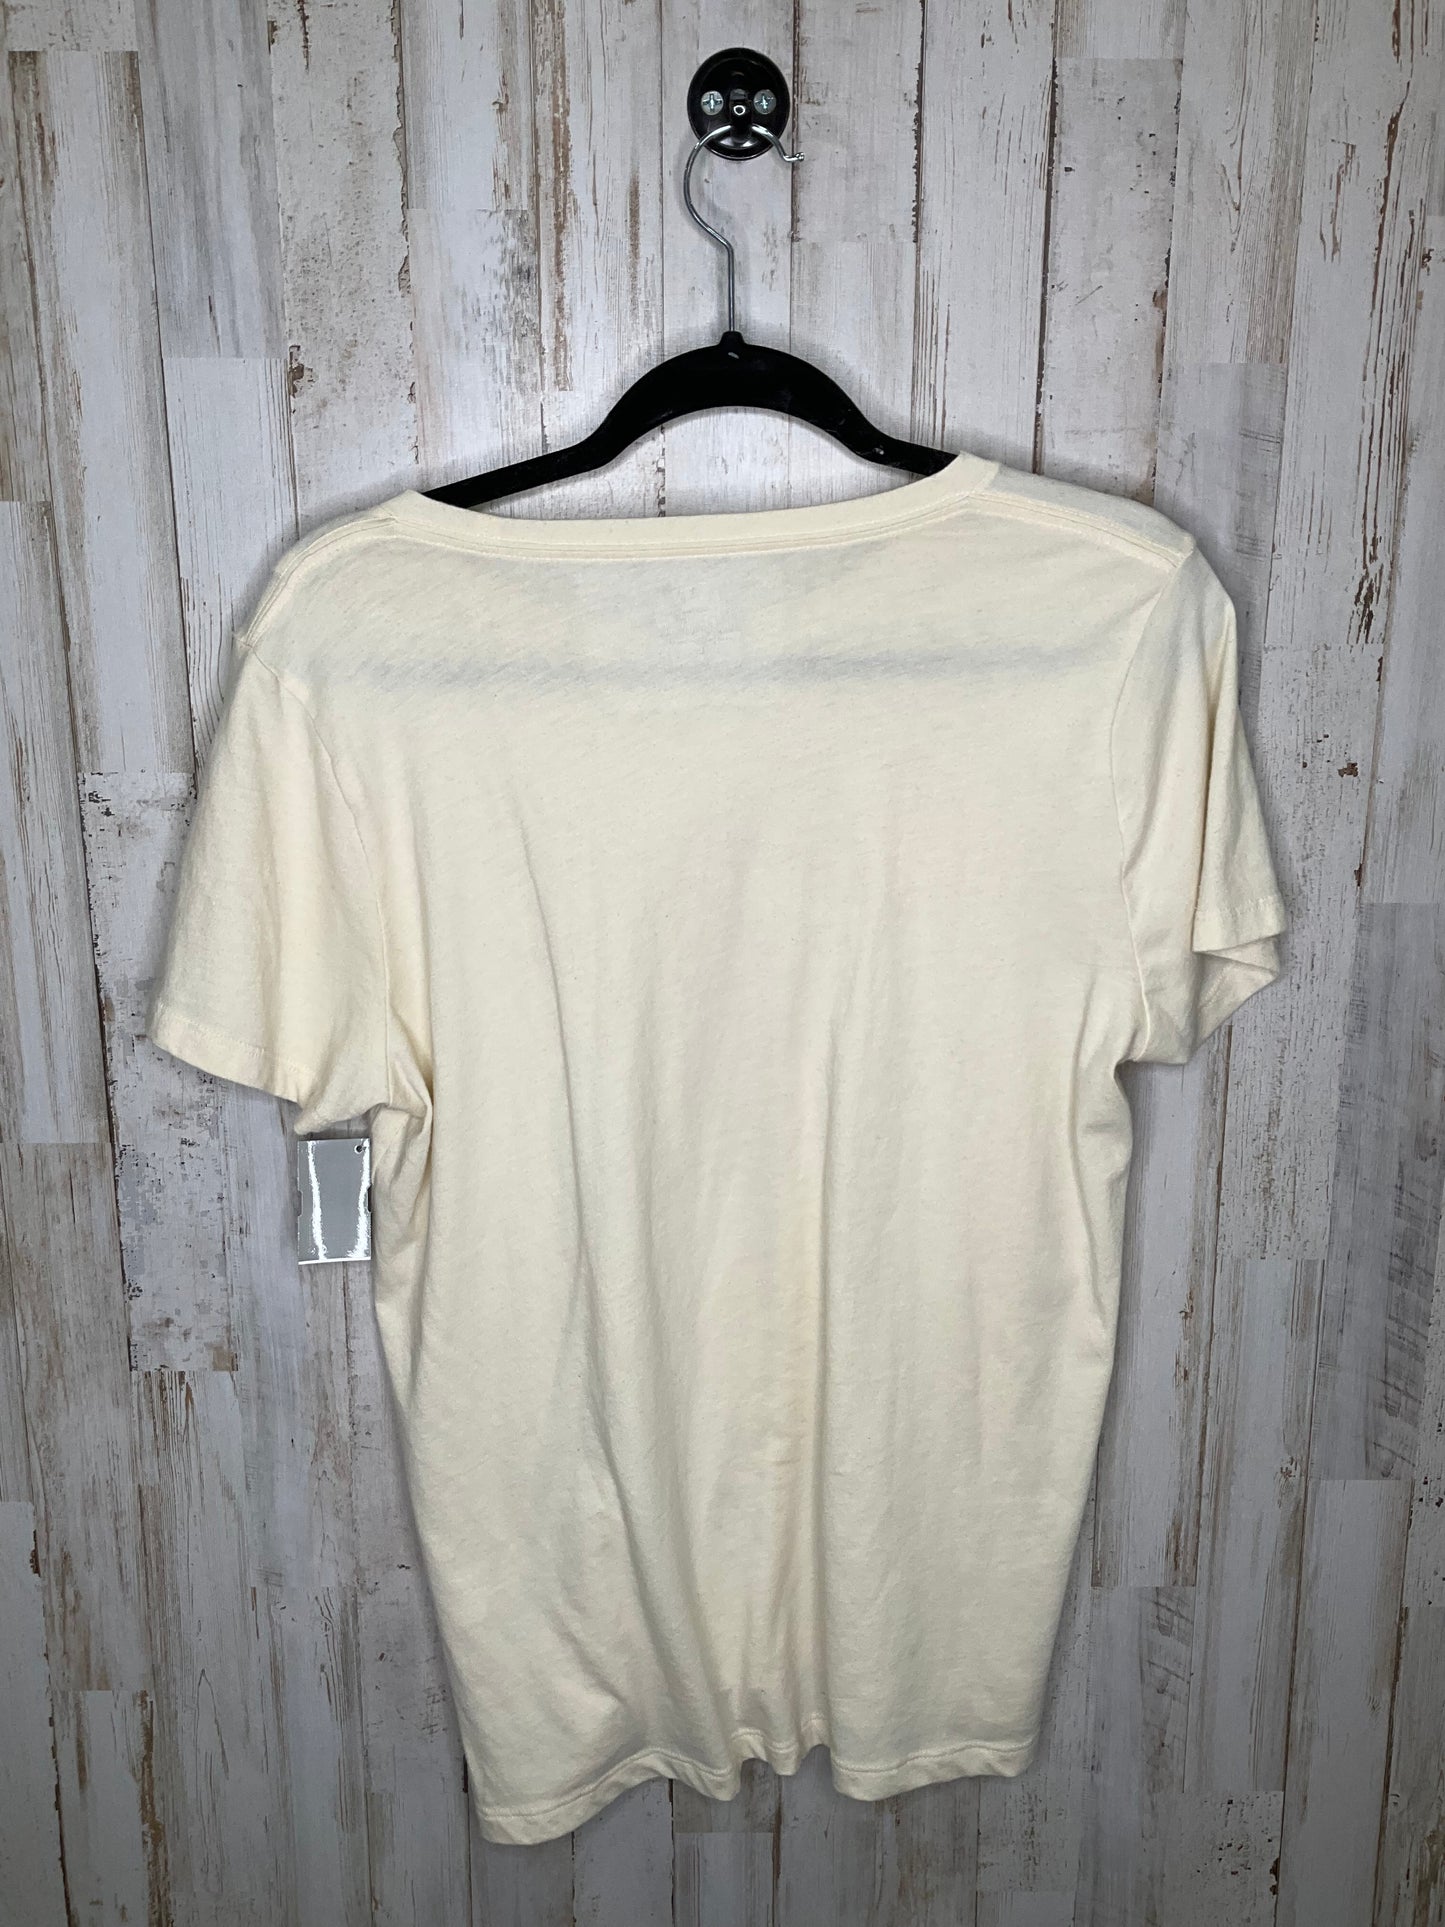 Top Short Sleeve By J. Crew  Size: L